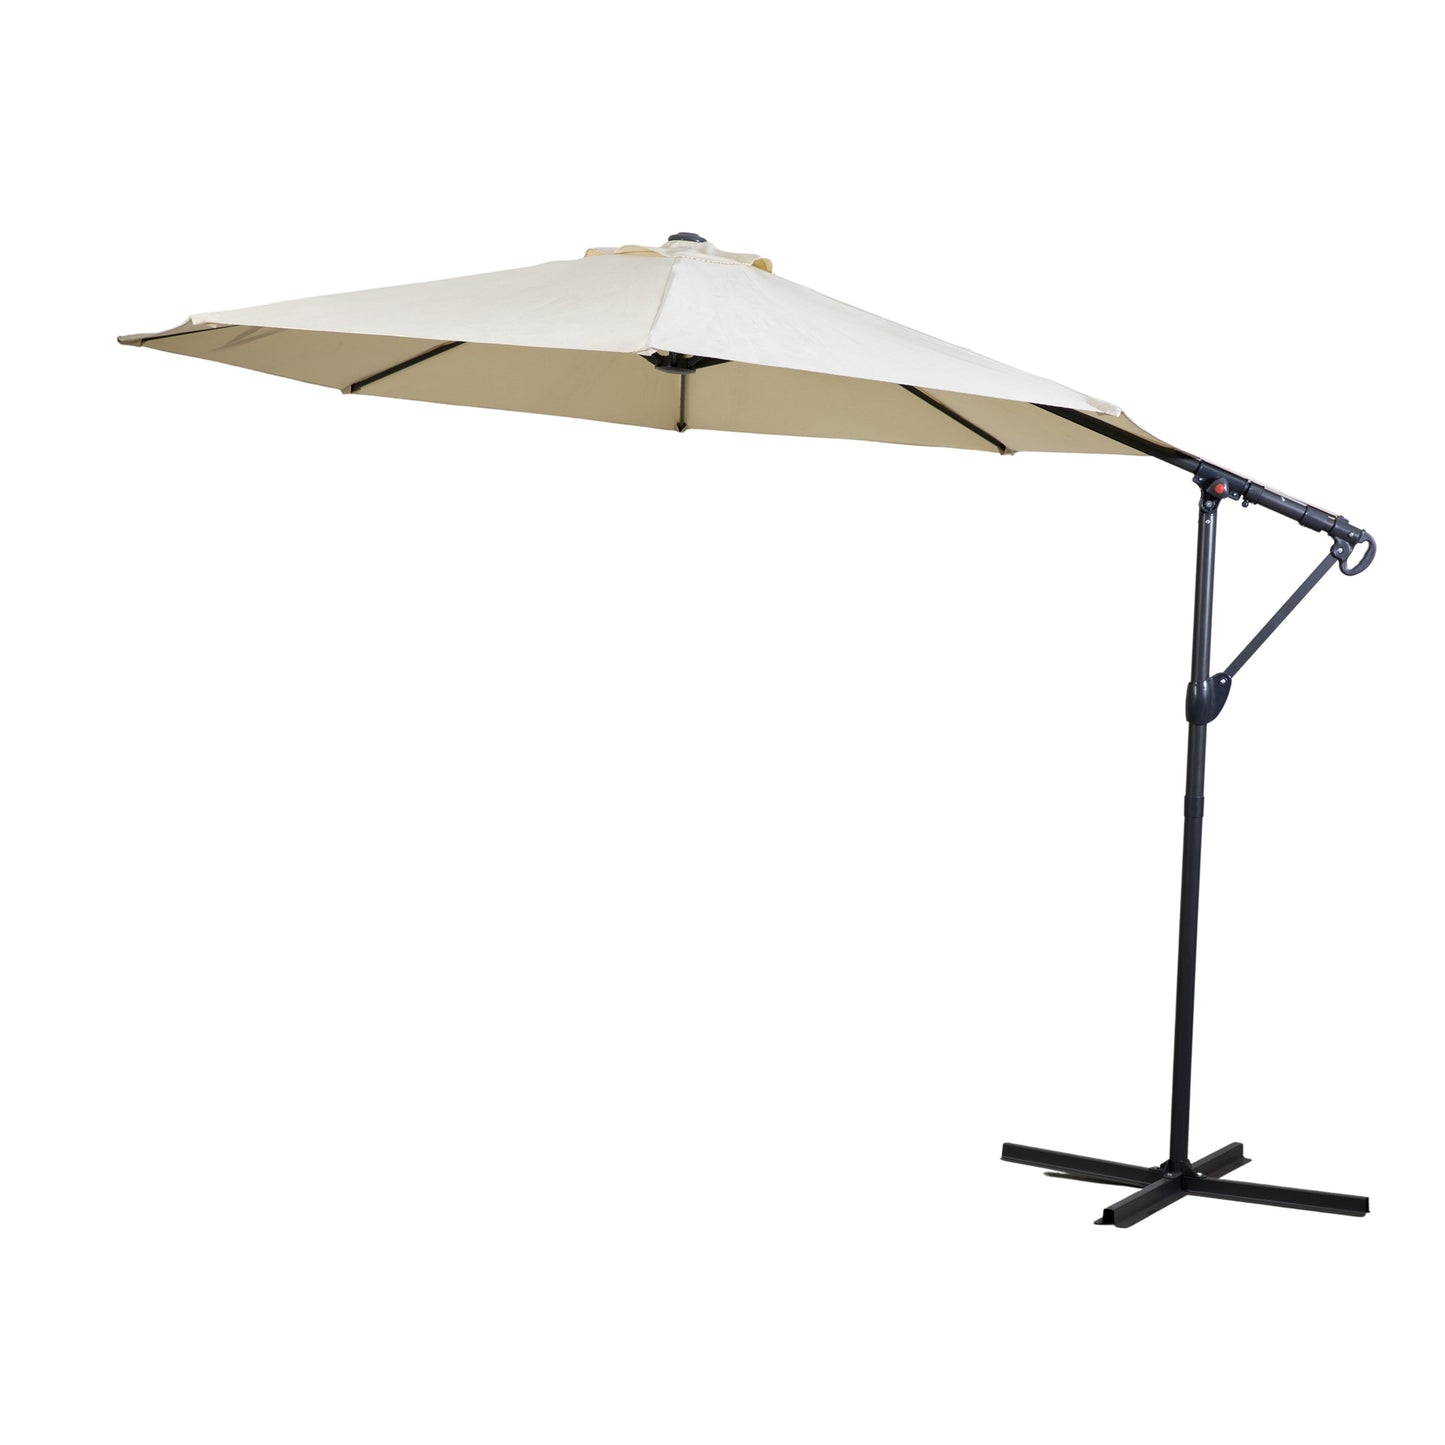 An Alwington 3m Cantilever Parasol Cream on a stand with a white background for home furniture decor.